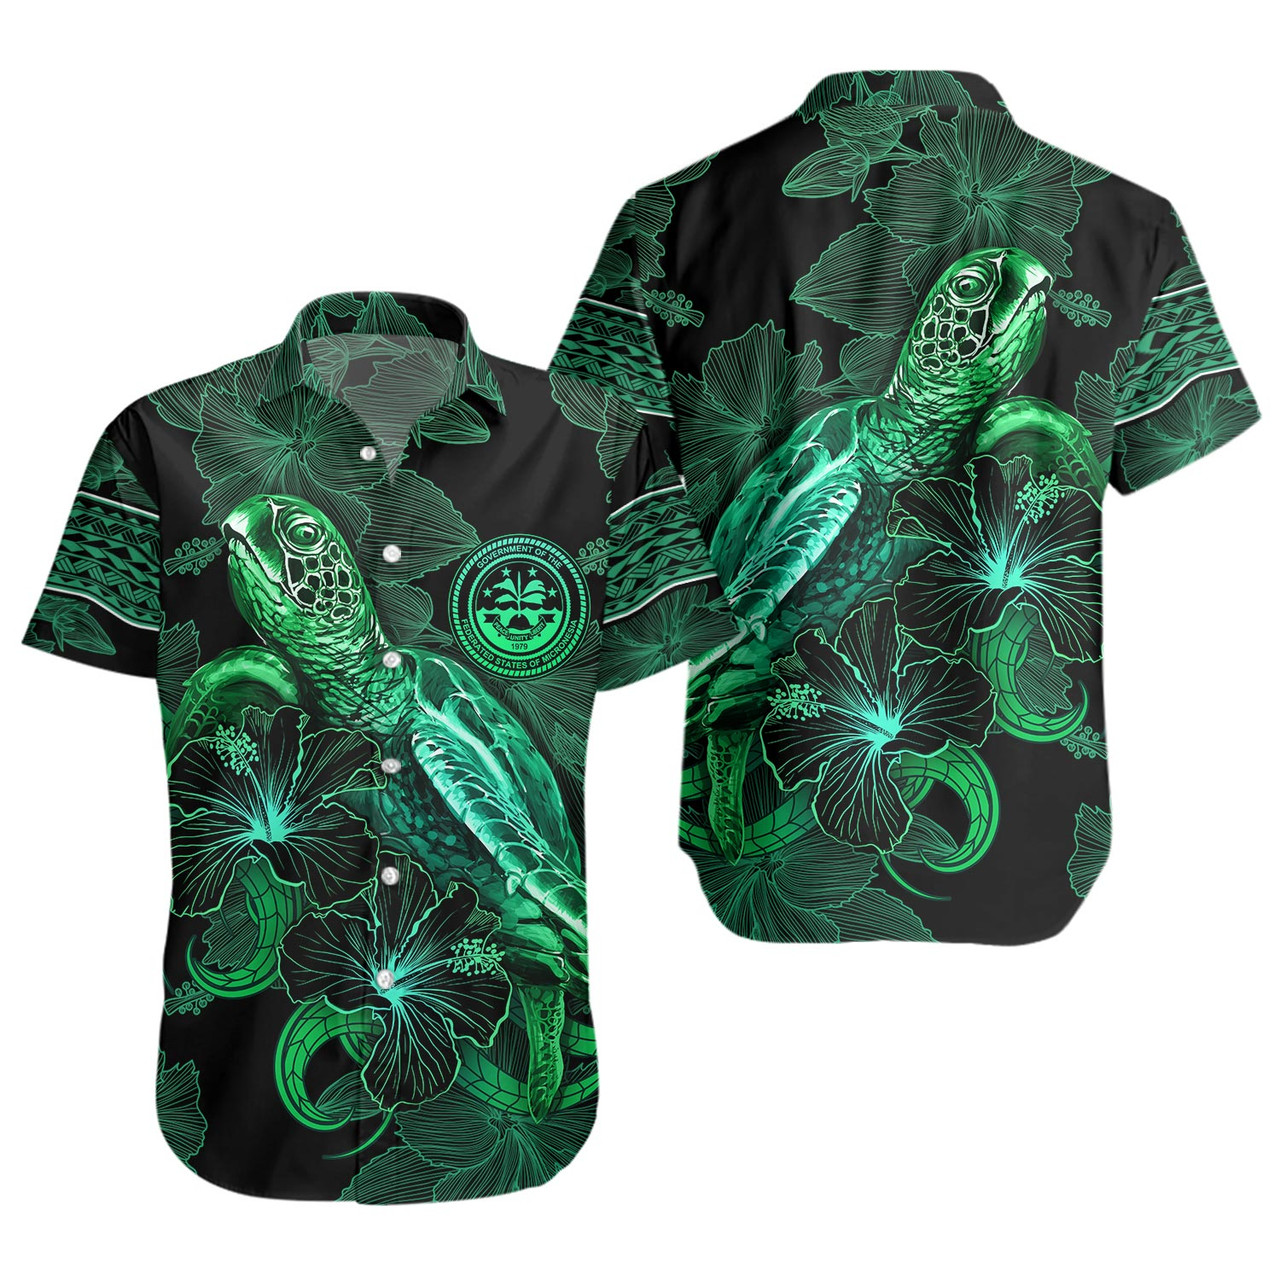 Federated States Of Micronesia Short Sleeve Shirt  Sea Turtle With Blooming Hibiscus Flowers Tribal Green